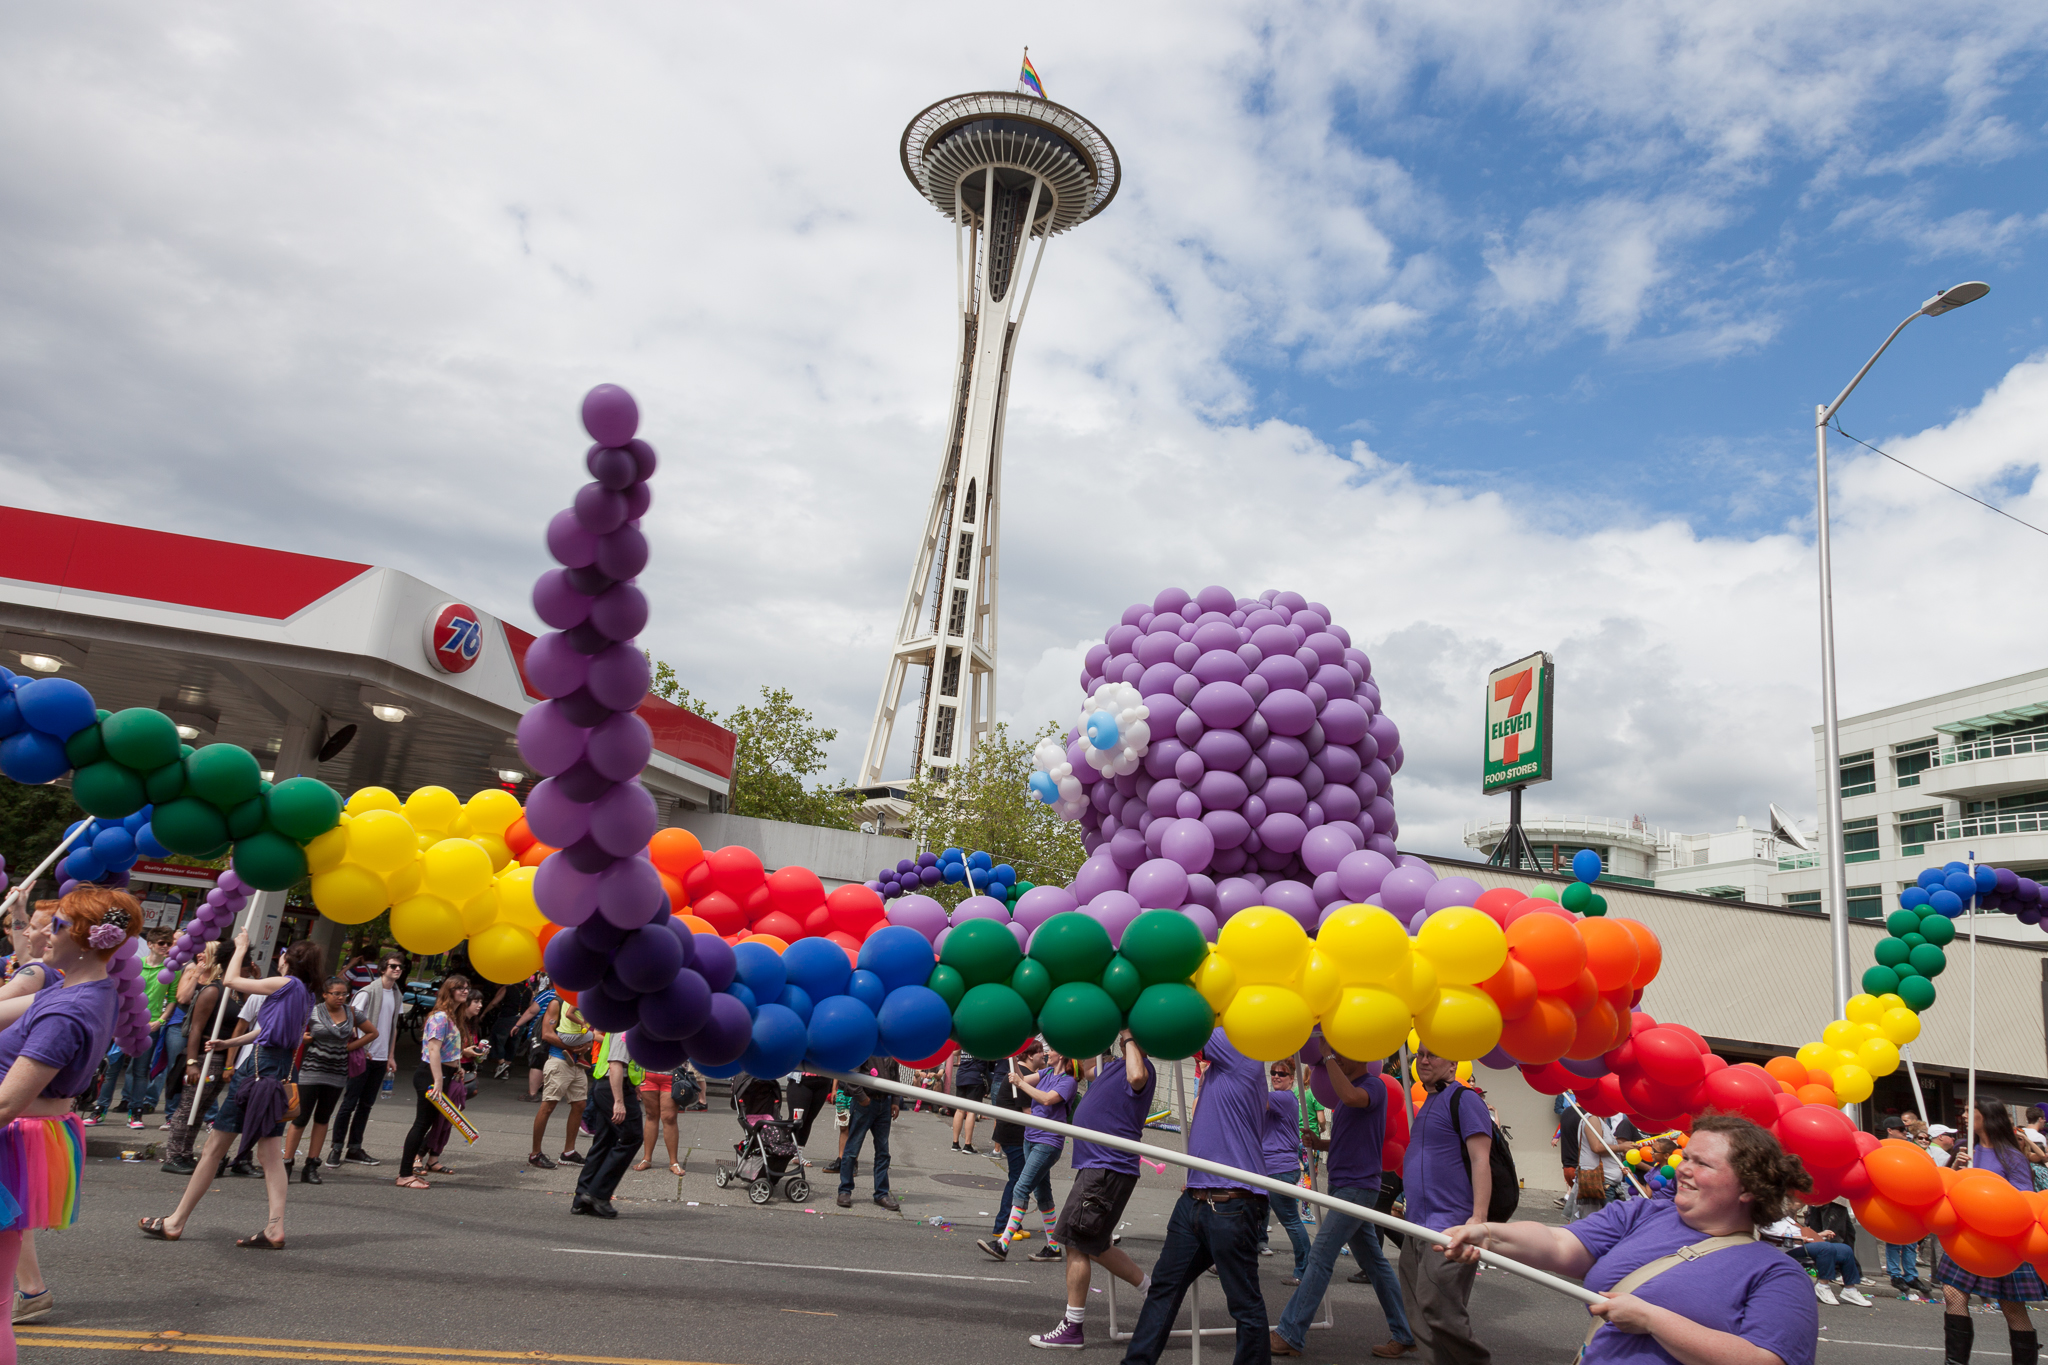 A group of people carrying a giant octopus made out of purple, blue, green yellow, orange, and red balloons with the Space Needle in the background.